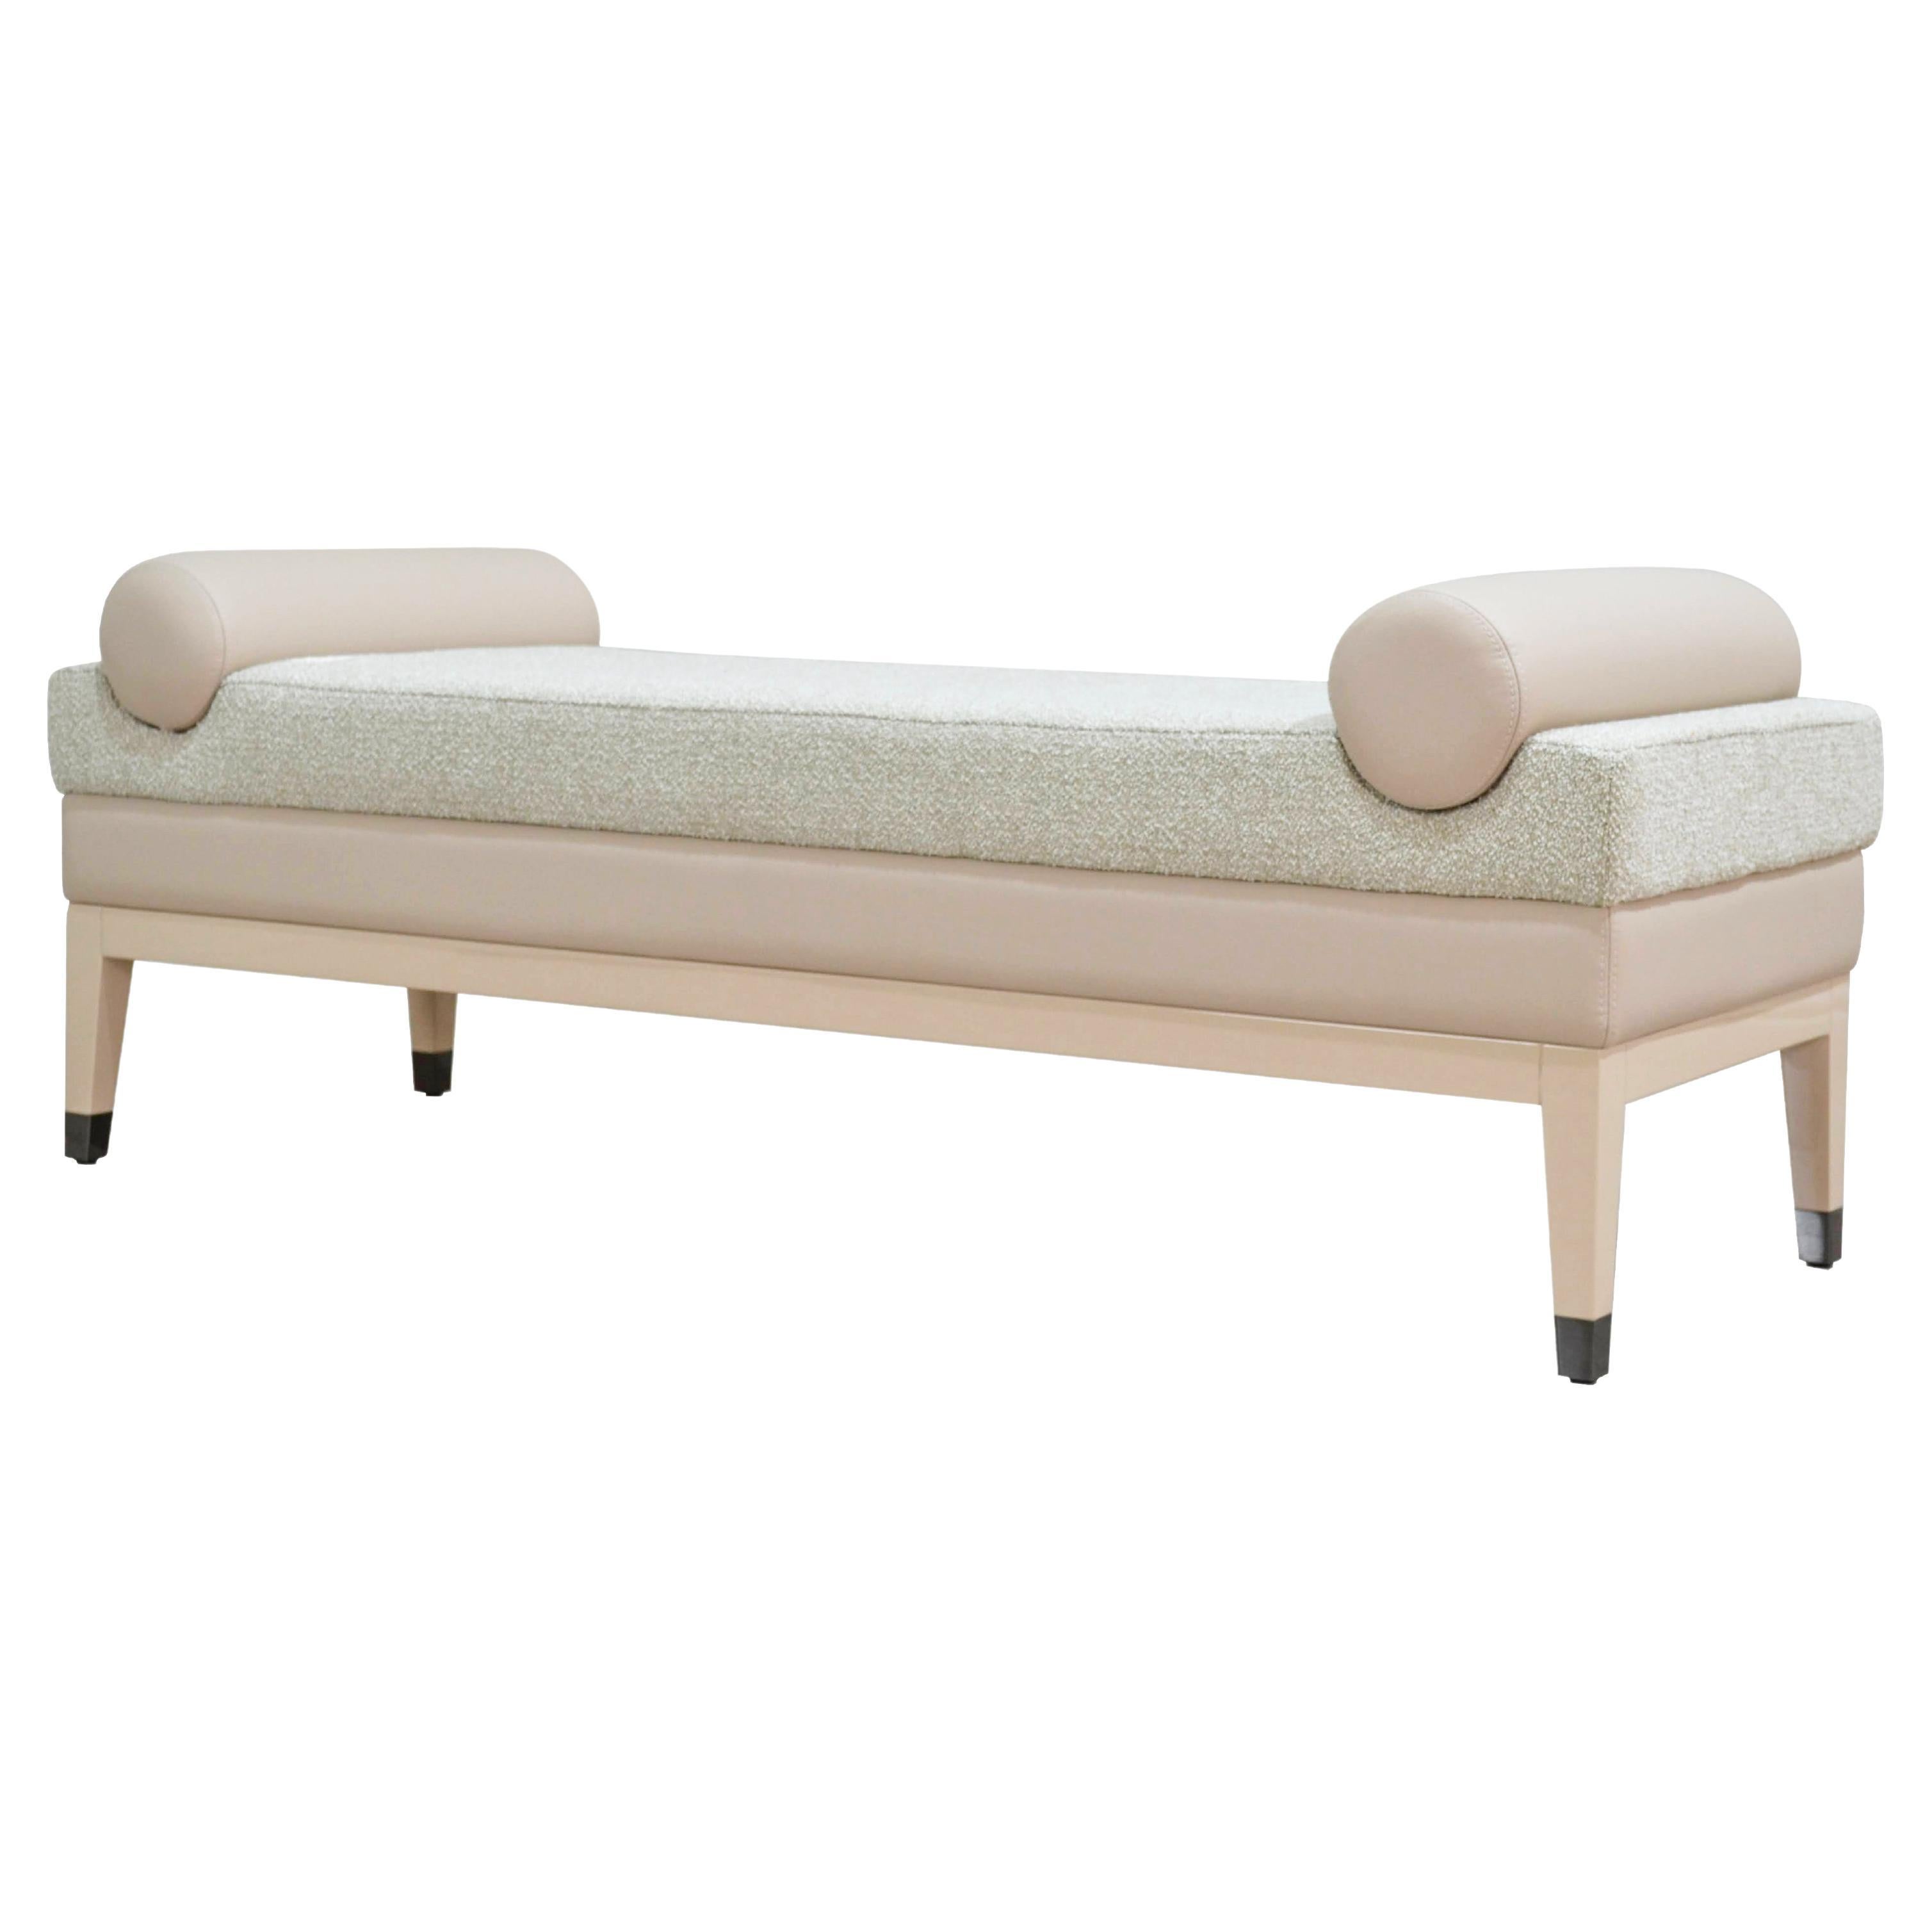 Italian Contemporary Upholstered Bench in Quinoa Fabric and Beige Leather